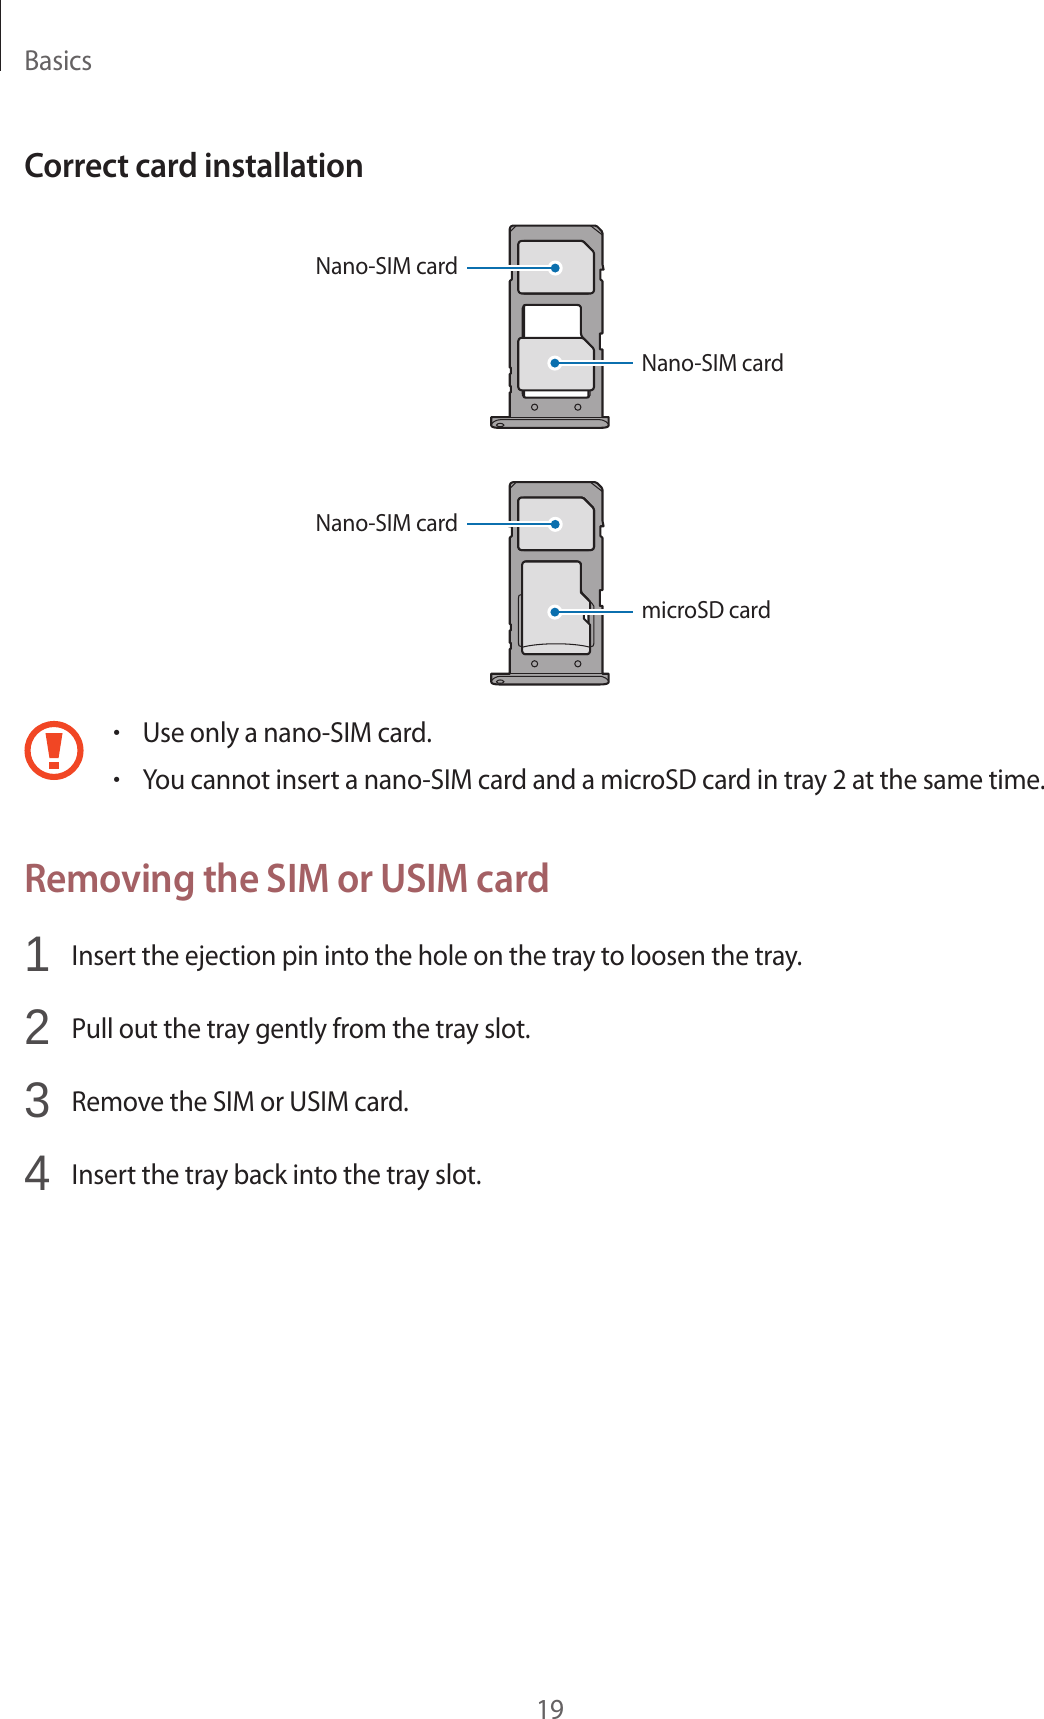 Basics19Correct card installationNano-SIM cardNano-SIM cardNano-SIM cardmicroSD card•Use only a nano-SIM card.•You cannot insert a nano-SIM card and a microSD card in tray 2 at the same time.Removing the SIM or USIM card1  Insert the ejection pin into the hole on the tray to loosen the tray.2  Pull out the tray gently from the tray slot.3  Remove the SIM or USIM card.4  Insert the tray back into the tray slot.